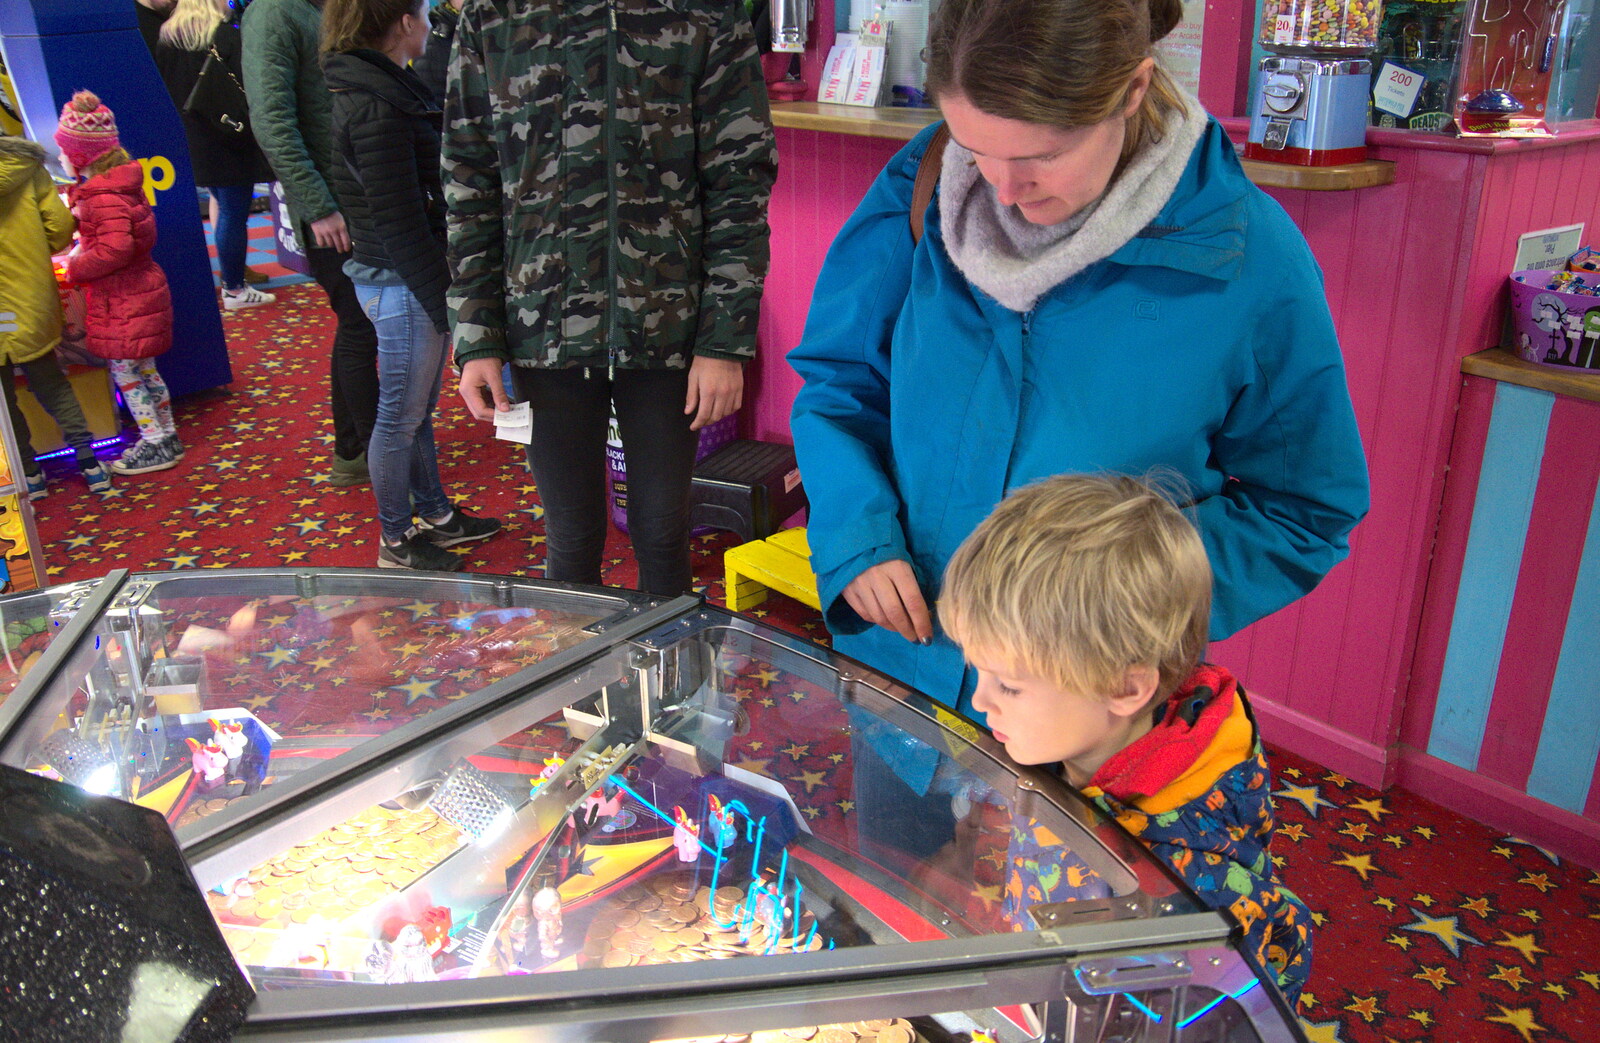 Harry looks at the 2p shove machines from A Trip to the Amusements, Southwold Pier, Southwold, Suffolk - 5th November 2017